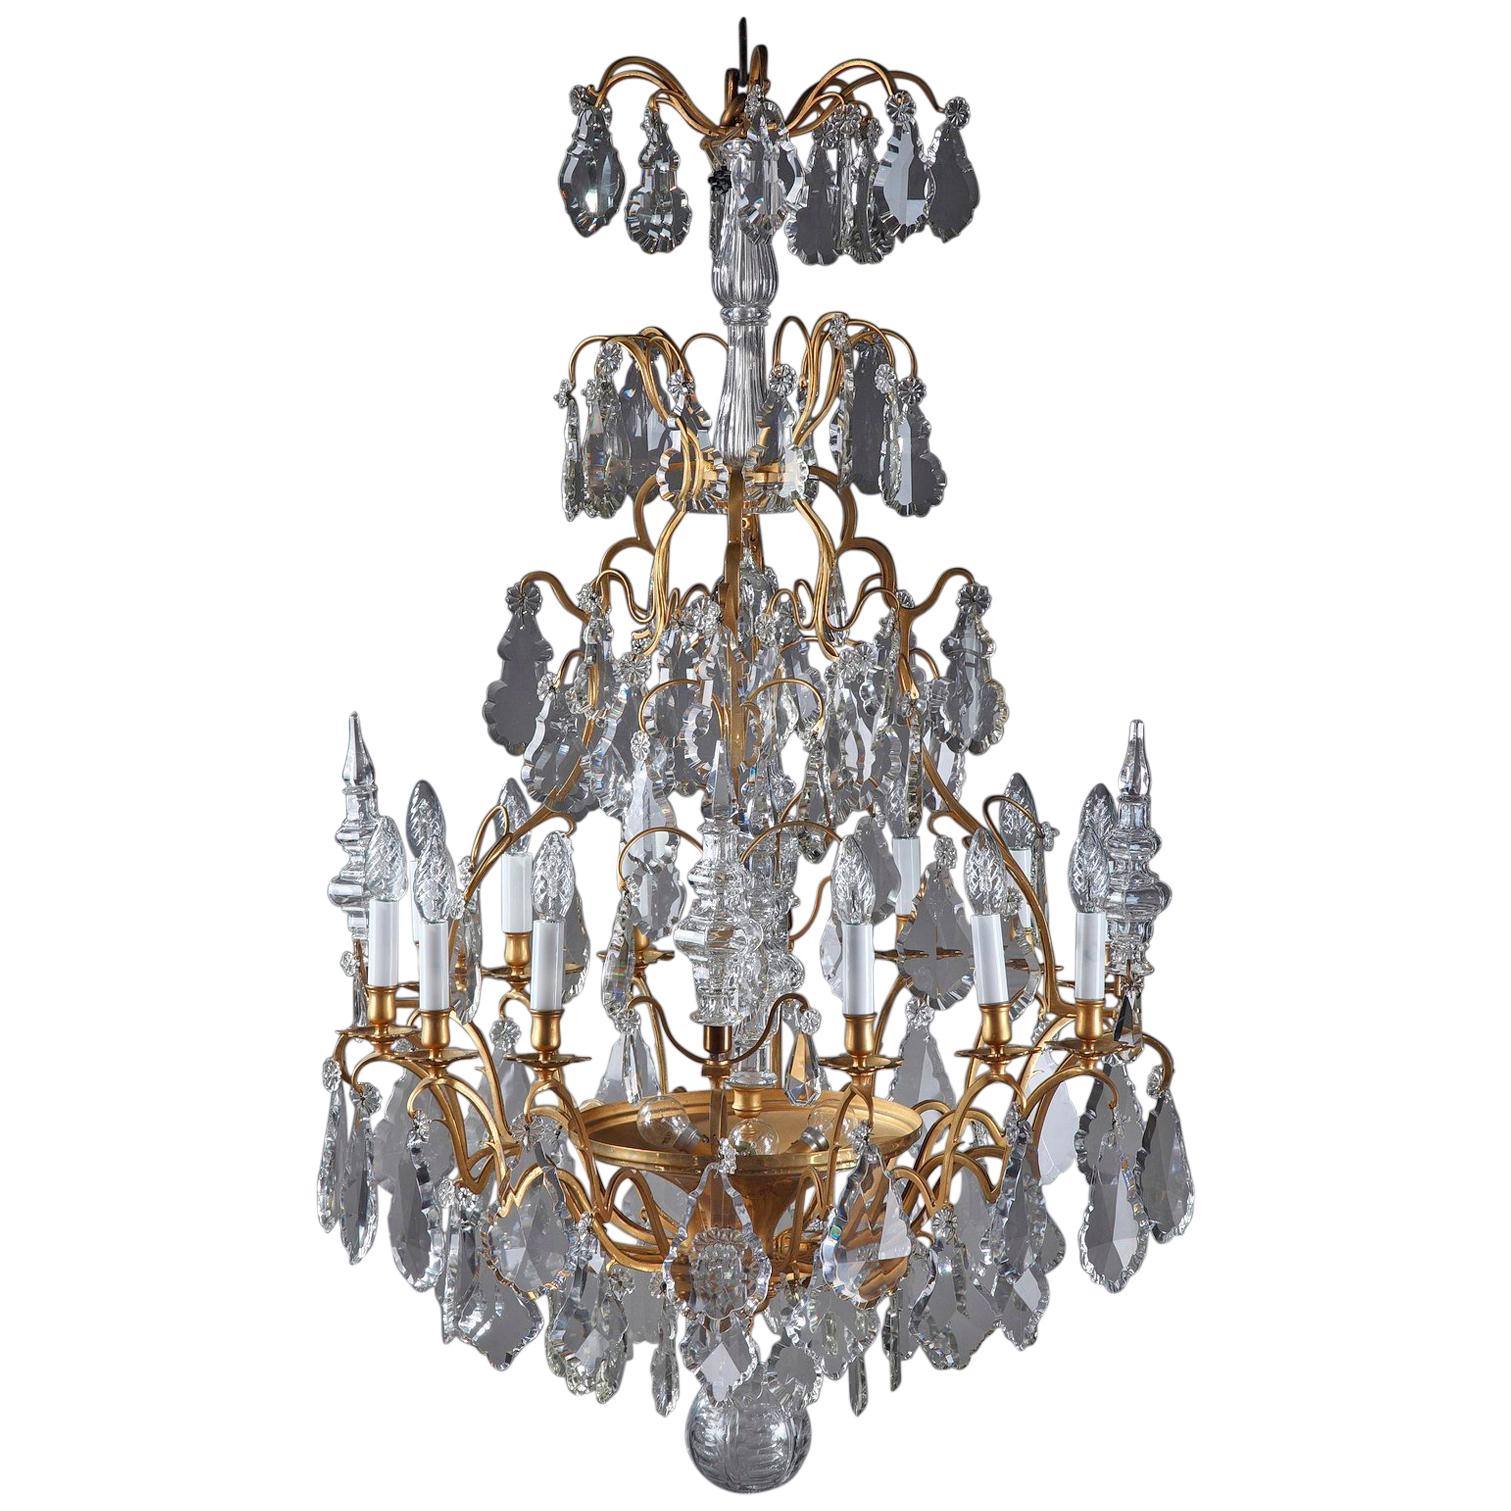 Late 19th Century Monumental 12-Light Gilt Bronze and Crystal Chandelier